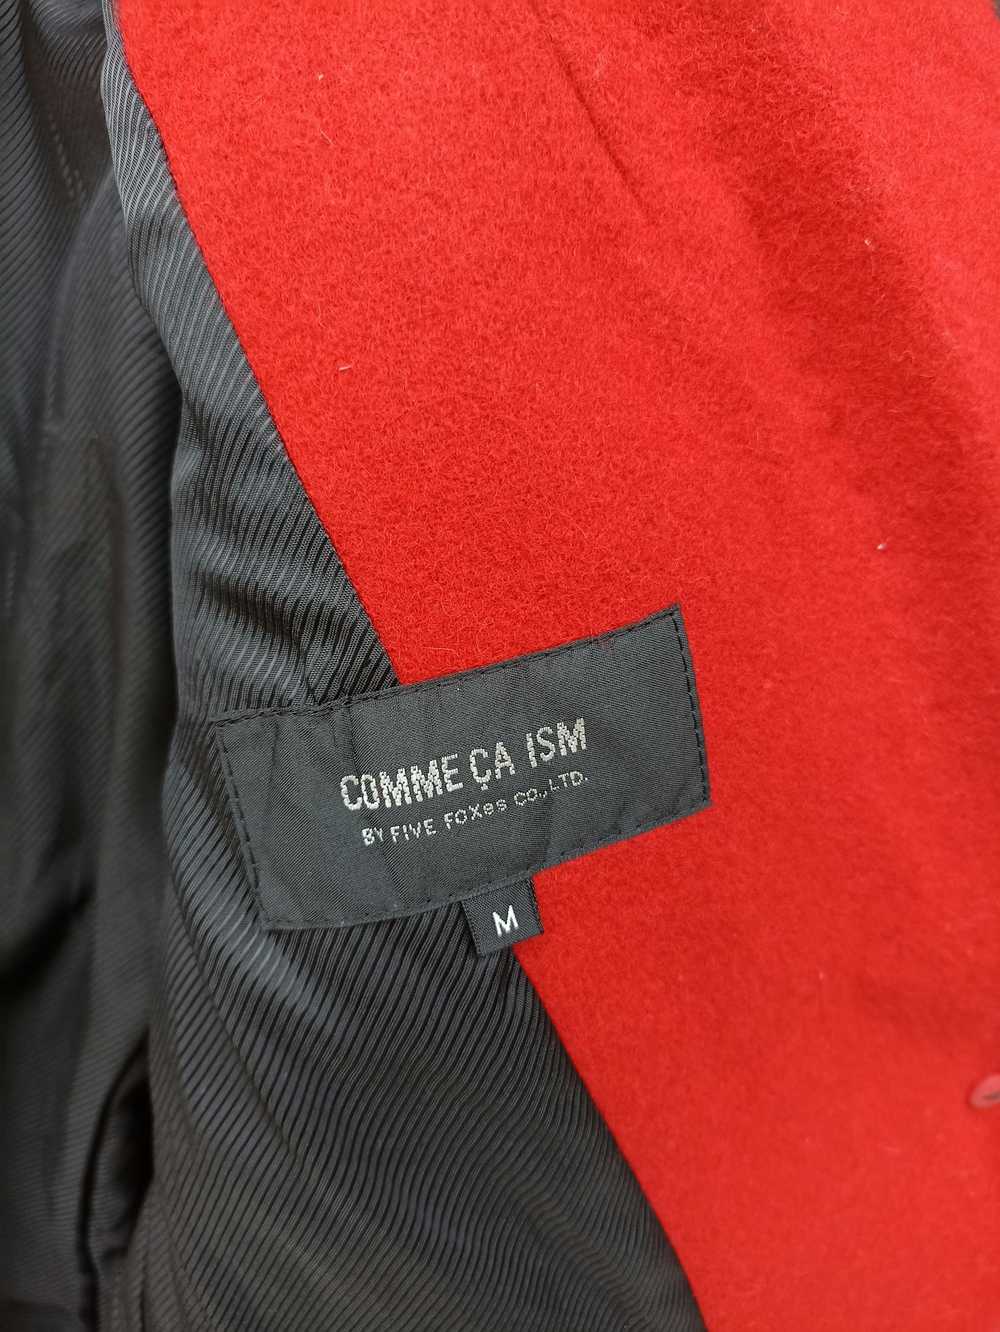 Comme Ca Ism × Streetwear × Vintage Comme Ca Ism … - image 10